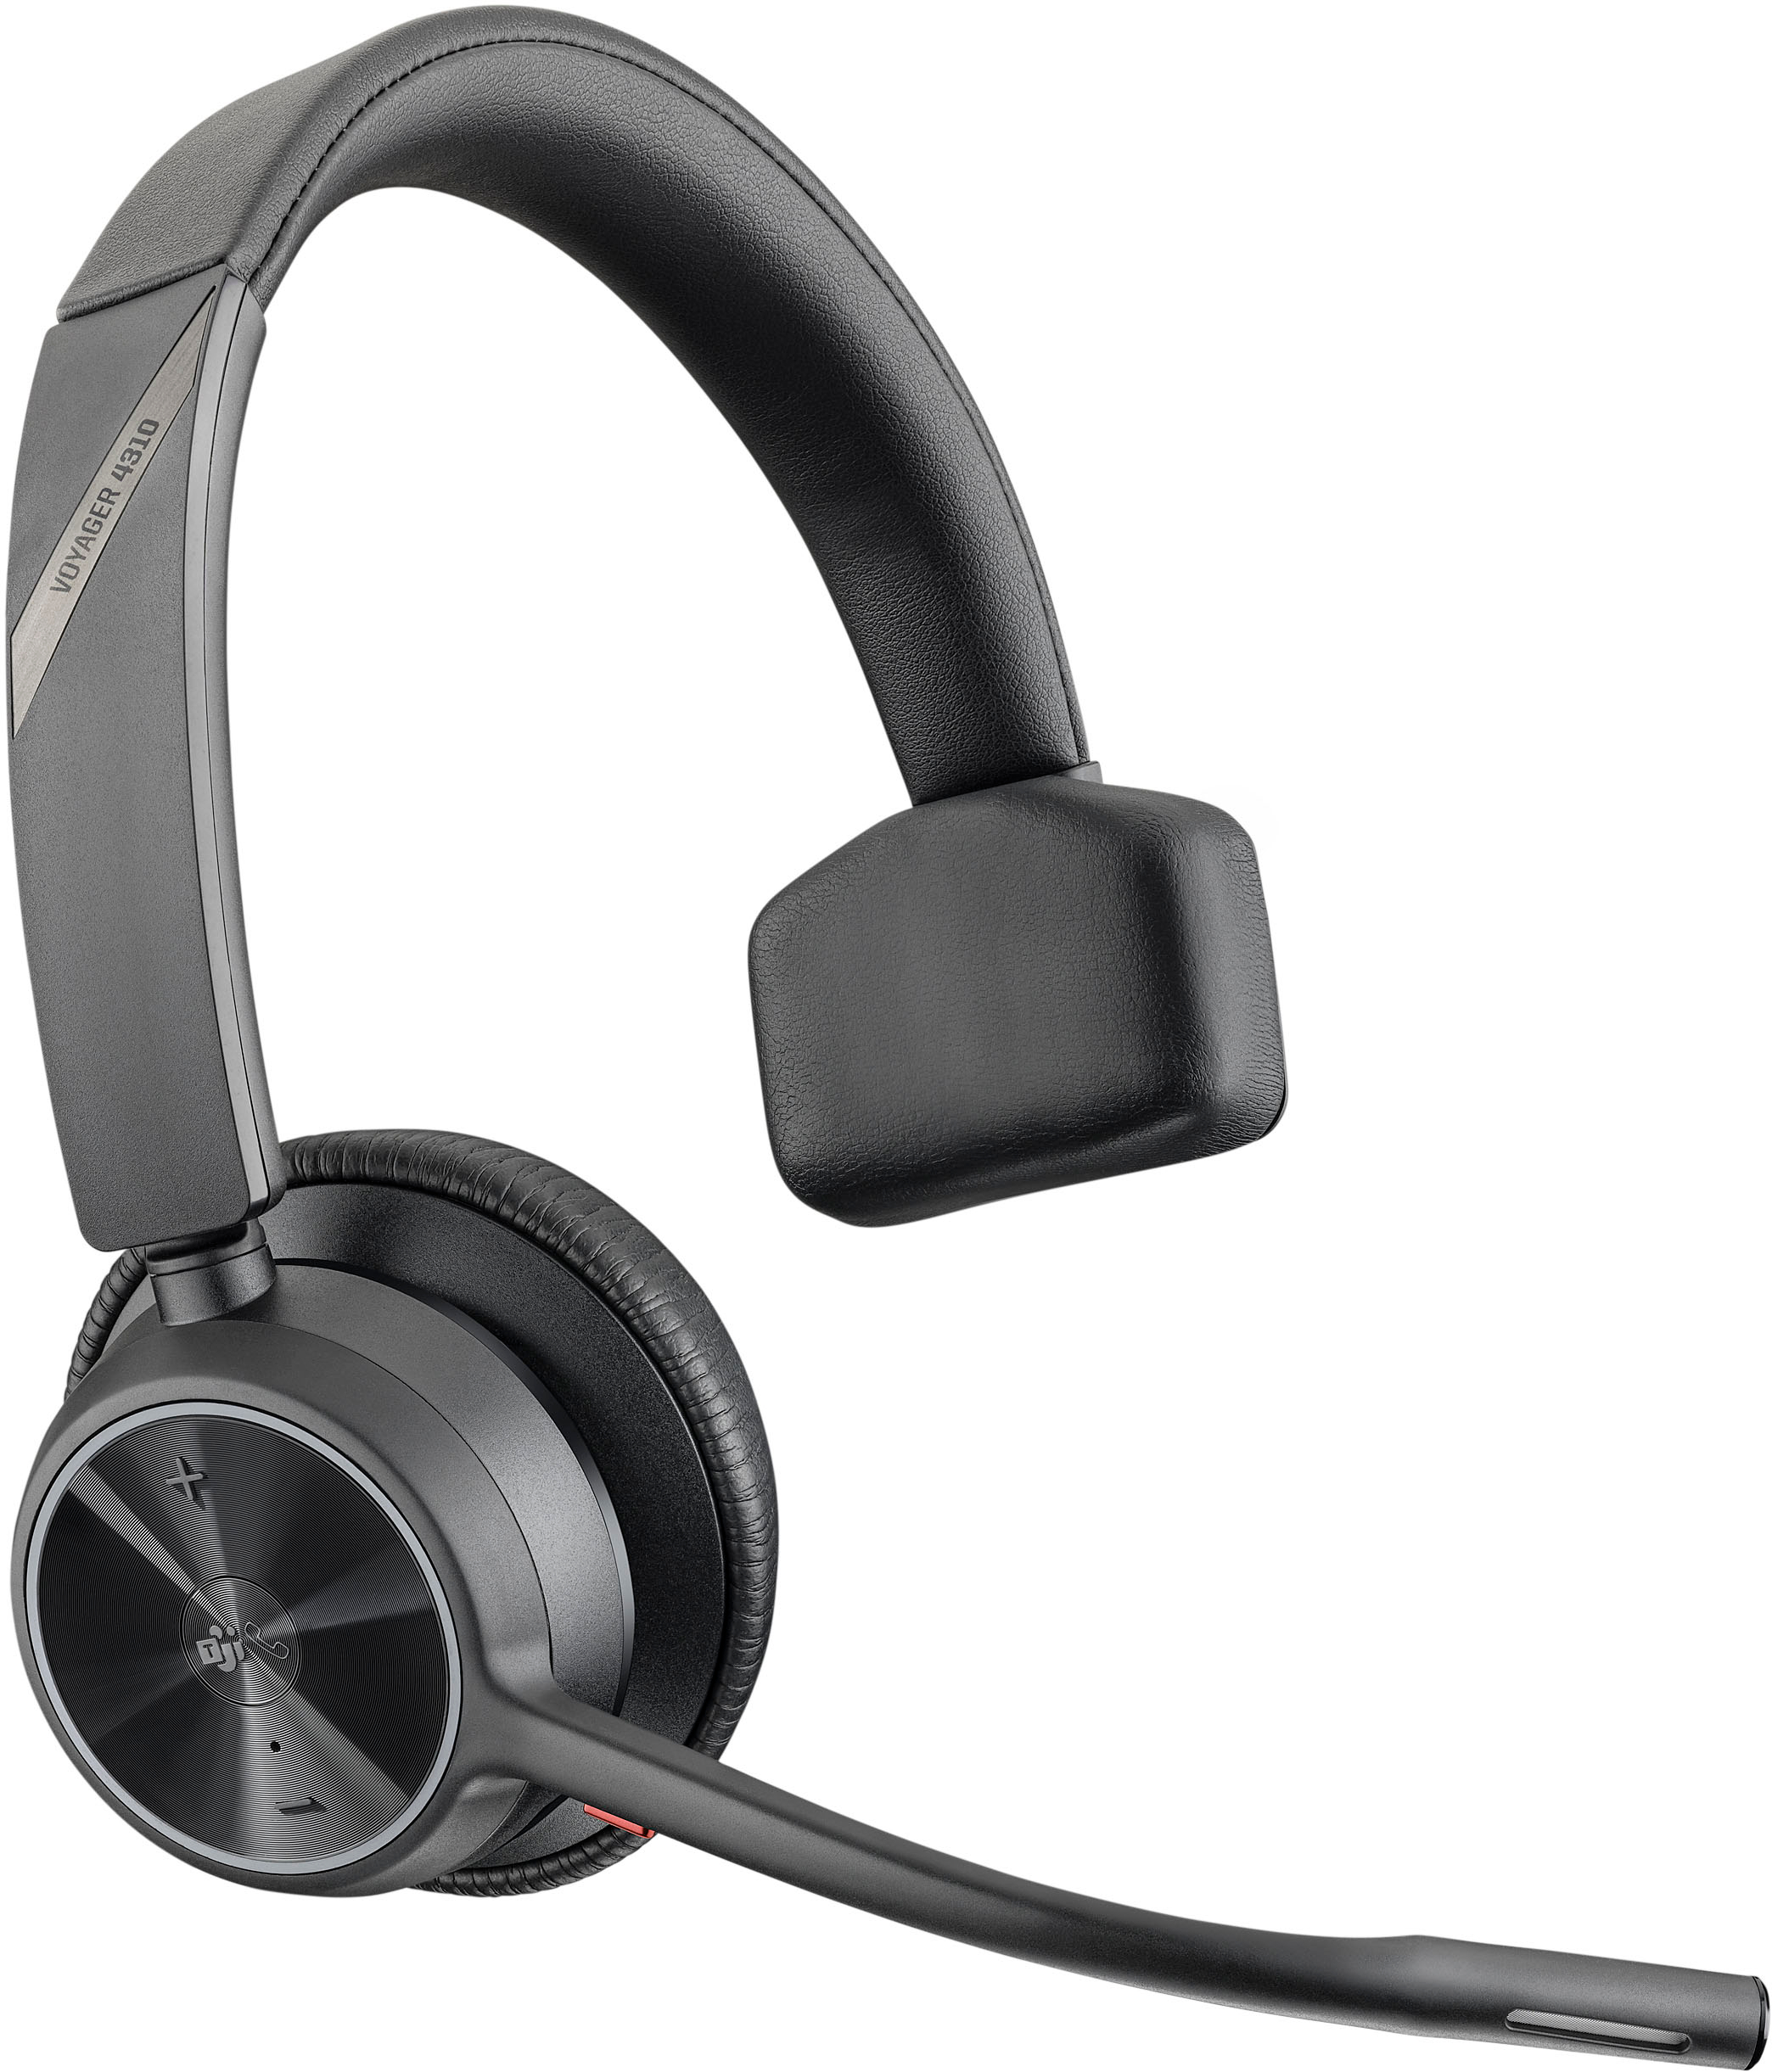 Angle View: Poly - formerly Plantronics - Voyager 4310 Wireless Noise Cancelling Single Ear Headset with mic - Black